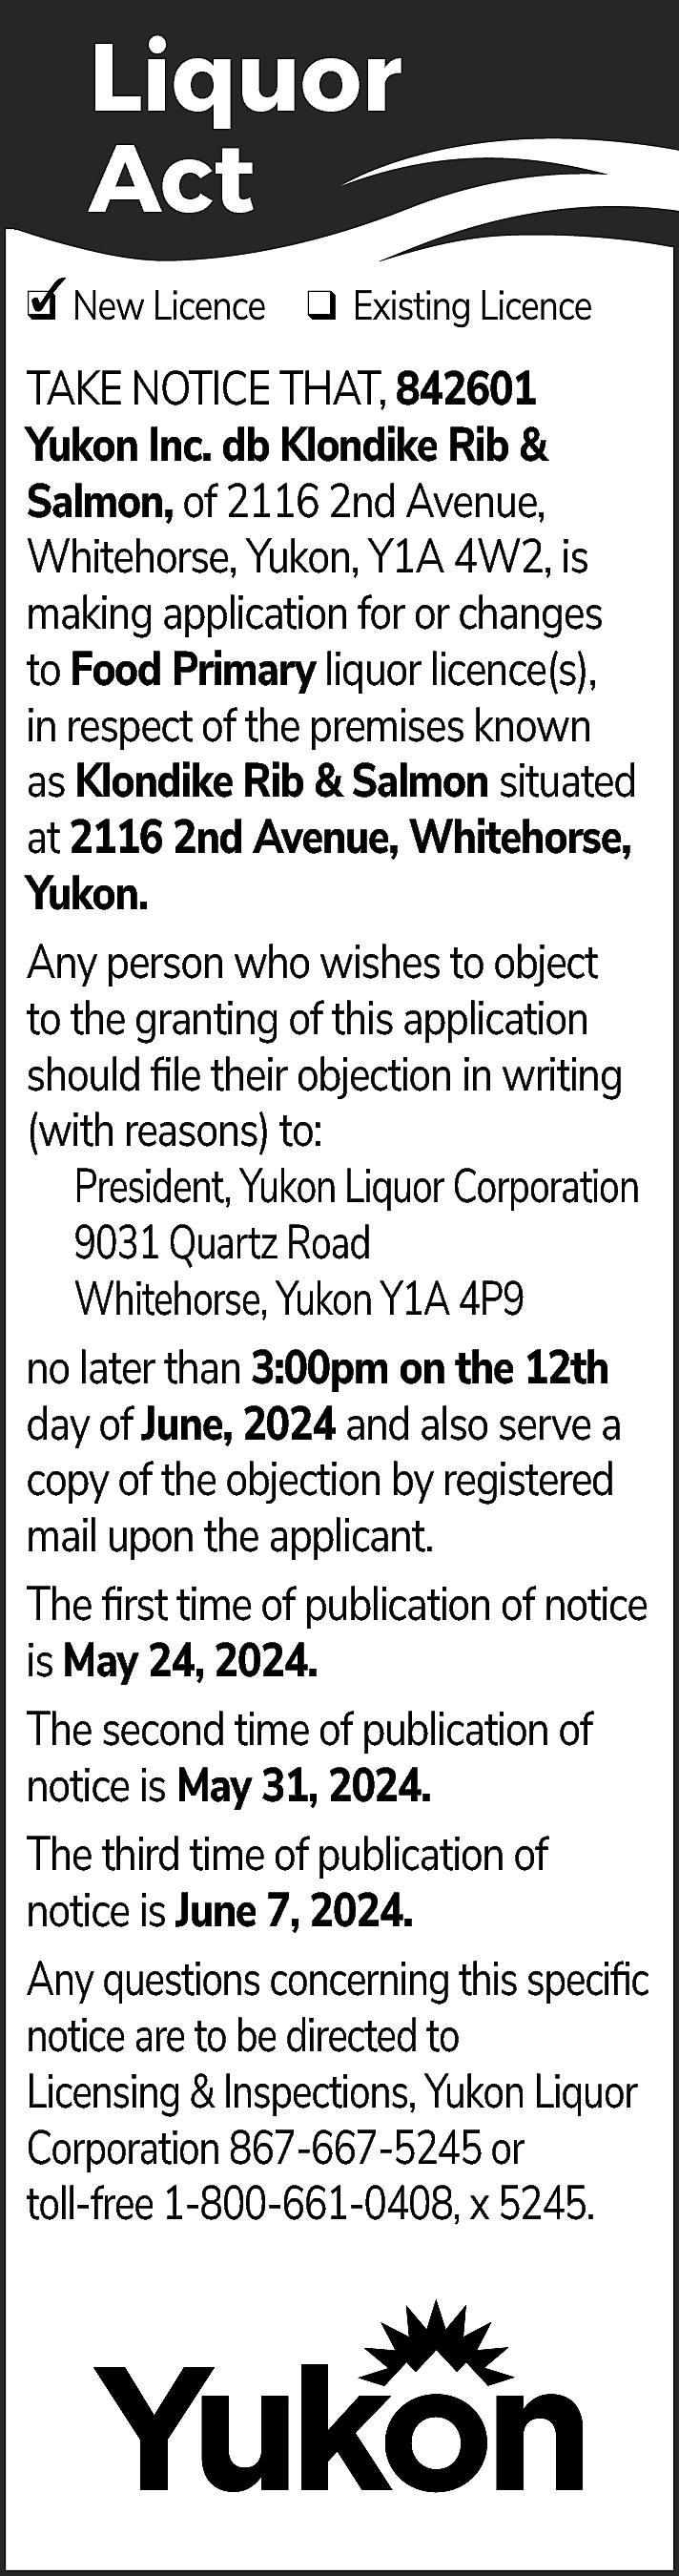 Liquor <br>Act <br>✓ New Licence  Liquor  Act  ✓ New Licence ❑ Existing Licence  ❑  TAKE NOTICE THAT, 842601  Yukon Inc. db Klondike Rib &  Salmon, of 2116 2nd Avenue,  Whitehorse, Yukon, Y1A 4W2, is  making application for or changes  to Food Primary liquor licence(s),  in respect of the premises known  as Klondike Rib & Salmon situated  at 2116 2nd Avenue, Whitehorse,  Yukon.  Any person who wishes to object  to the granting of this application  should file their objection in writing  (with reasons) to:  President, Yukon Liquor Corporation  9031 Quartz Road  Whitehorse, Yukon Y1A 4P9  no later than 3:00pm on the 12th  day of June, 2024 and also serve a  copy of the objection by registered  mail upon the applicant.  The first time of publication of notice  is May 24, 2024.  The second time of publication of  notice is May 31, 2024.  The third time of publication of  notice is June 7, 2024.  Any questions concerning this specific  notice are to be directed to  Licensing & Inspections, Yukon Liquor  Corporation 867-667-5245 or  toll-free 1-800-661-0408, x 5245.    